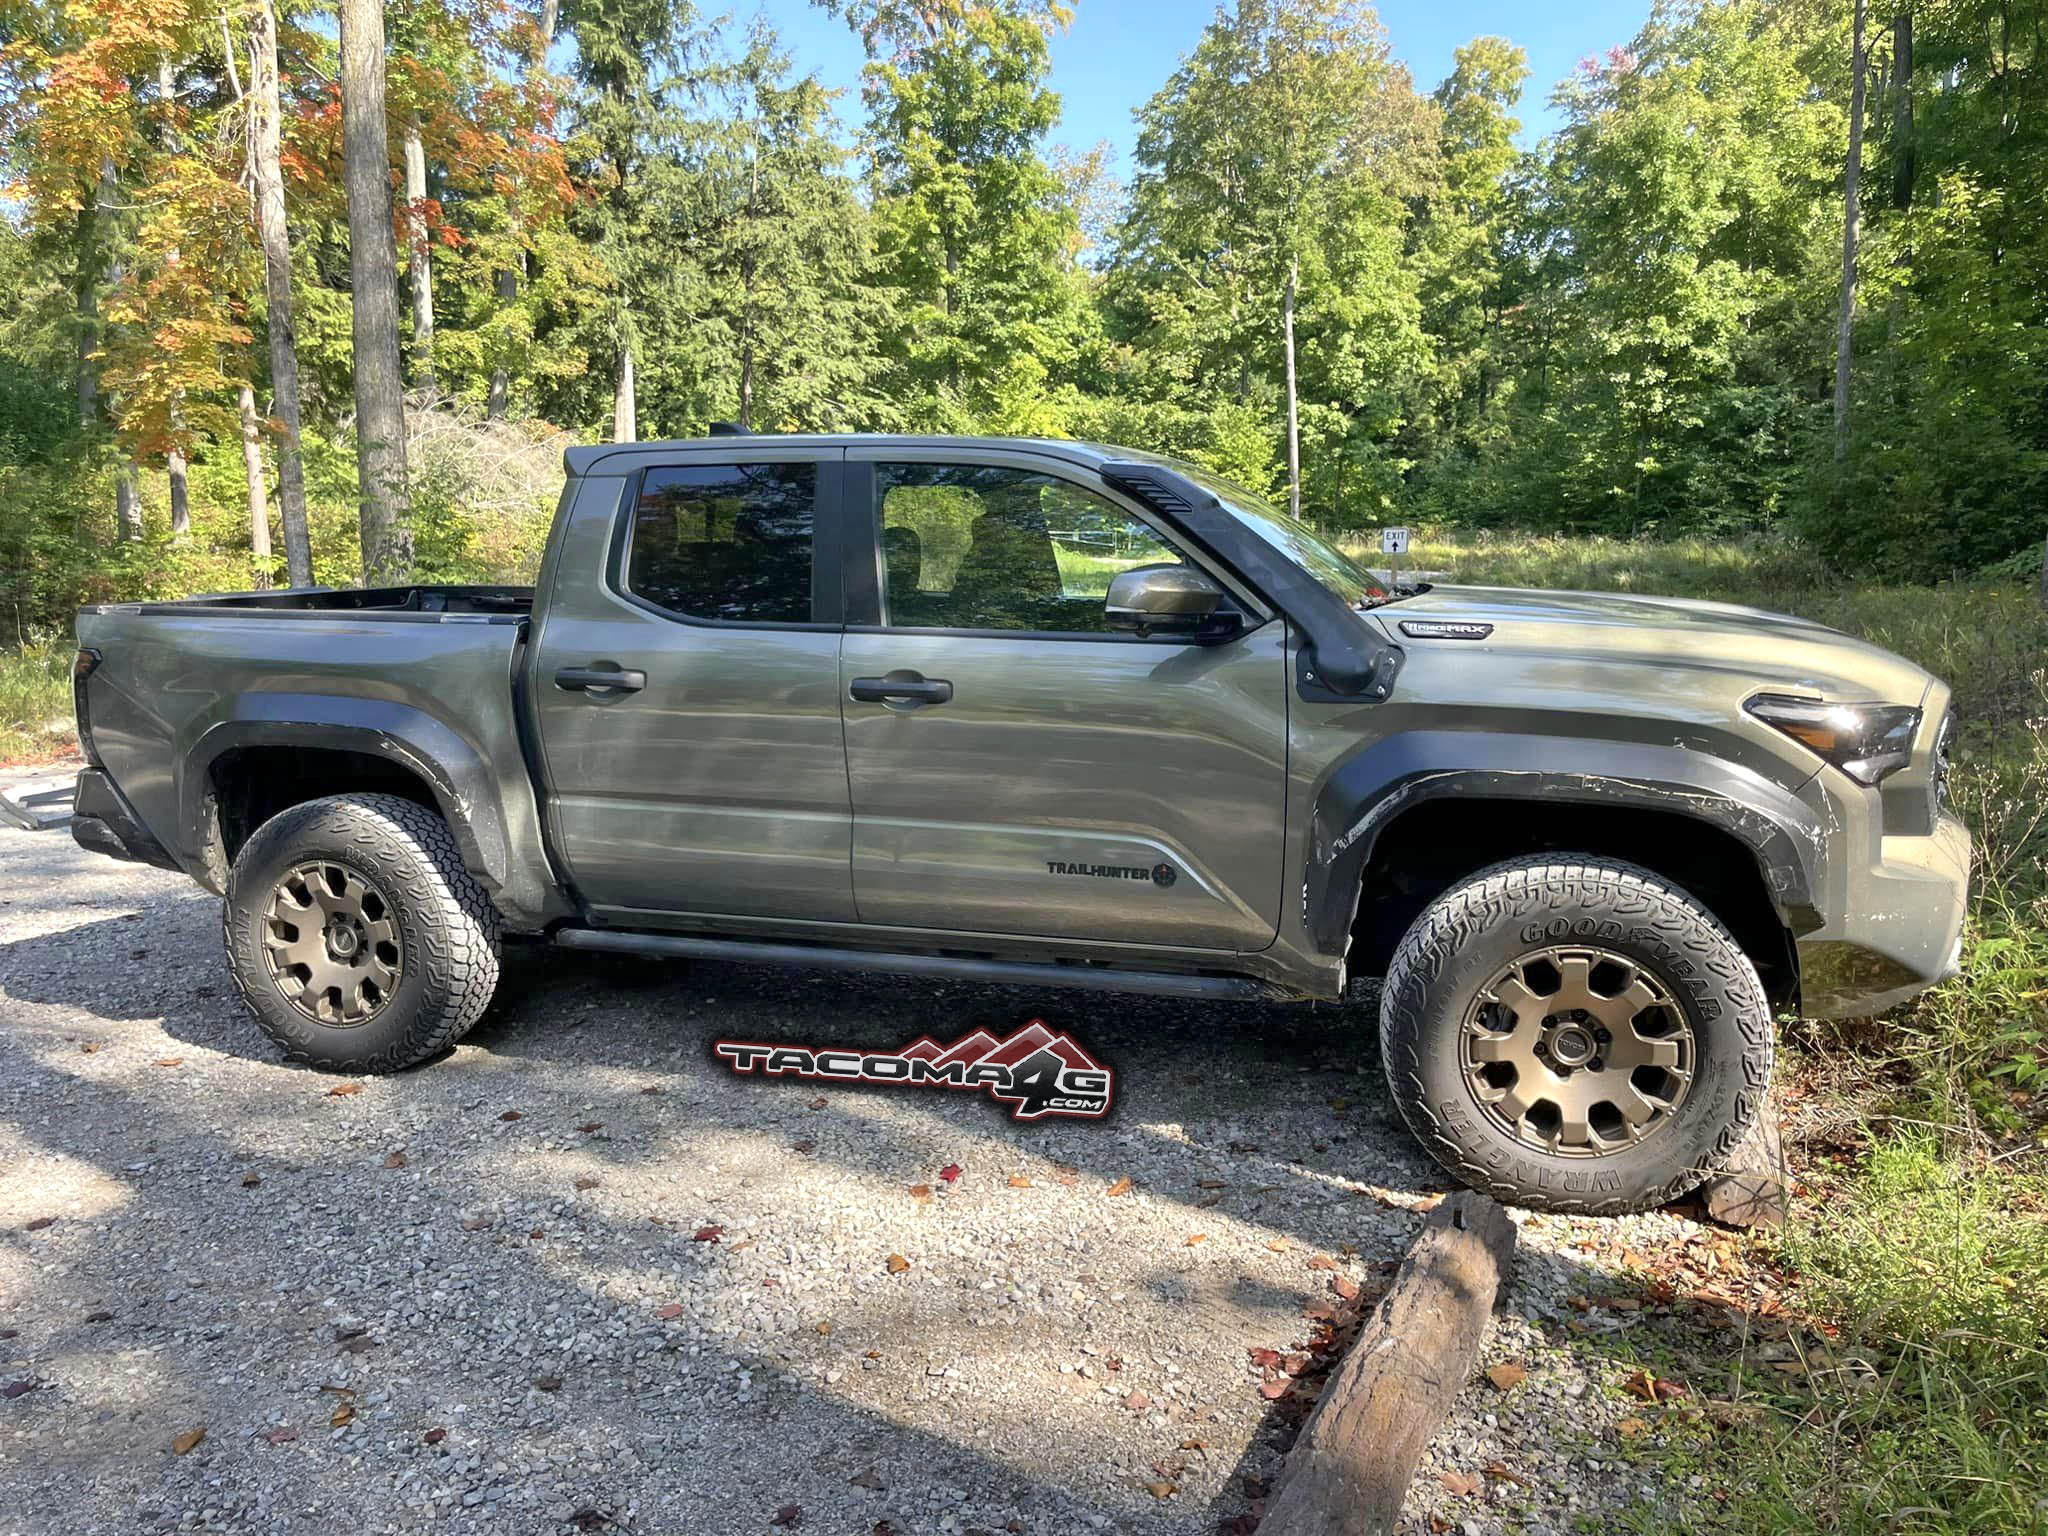 2024 Tacoma Short Bed (5' Foot) 2024 Tacoma first sighting! (Bronze Oxide Trailhunter spotted in wild) 5 foot Short Bed 2024 Toyota Tacoma Trail hunter Bronze Oxide 1